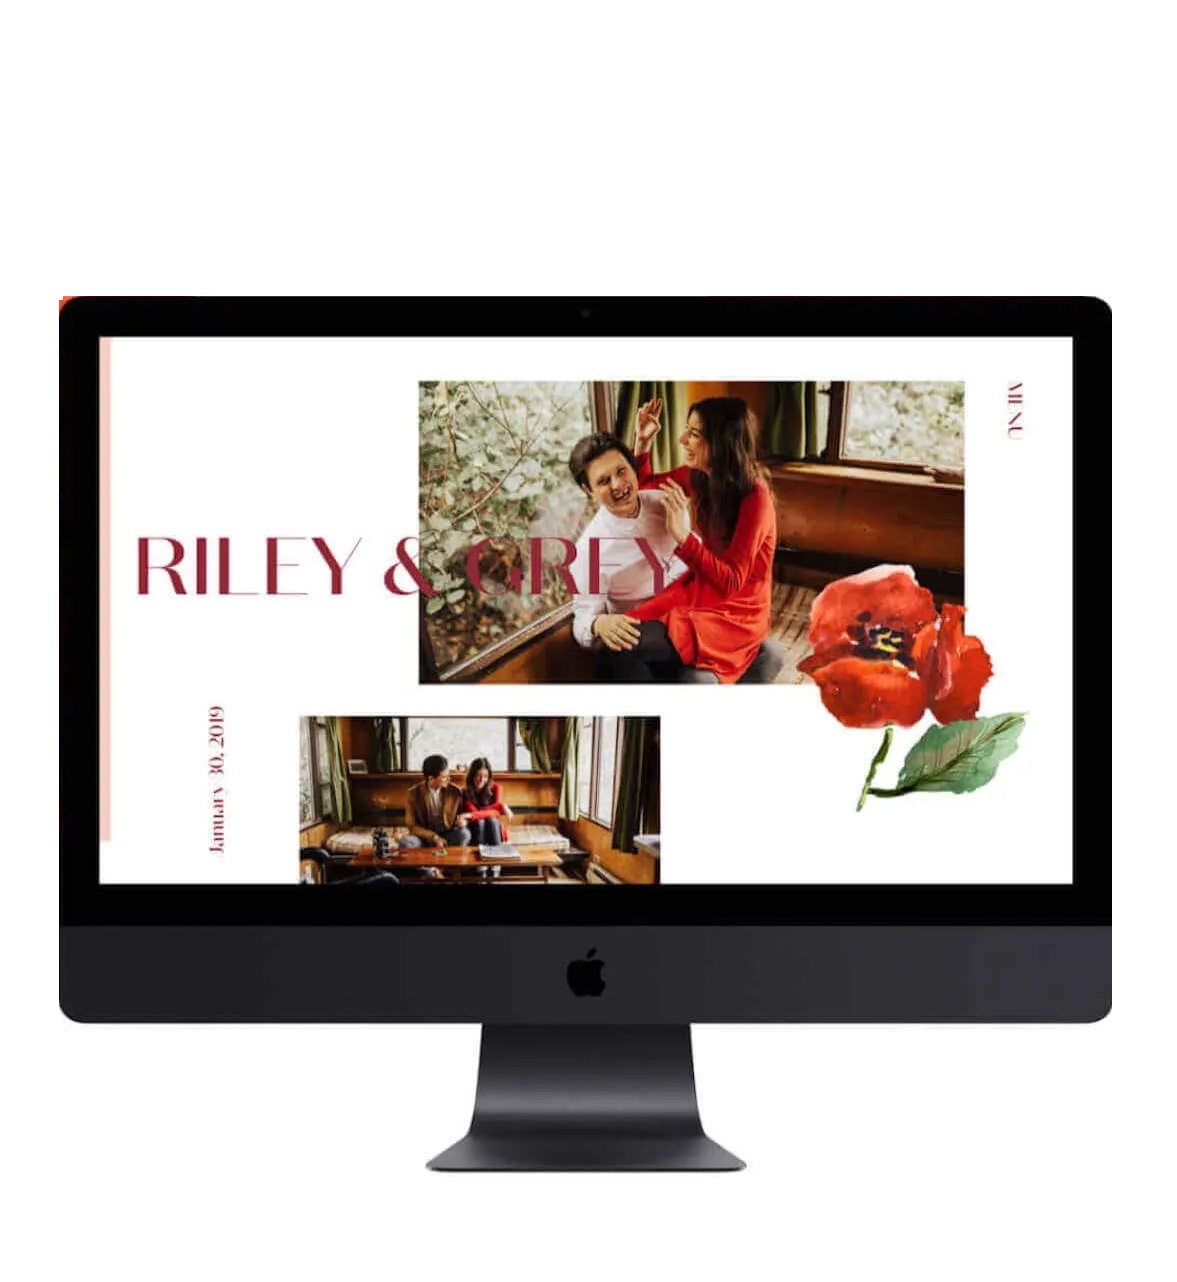 Wedding website displayed within an iMac device